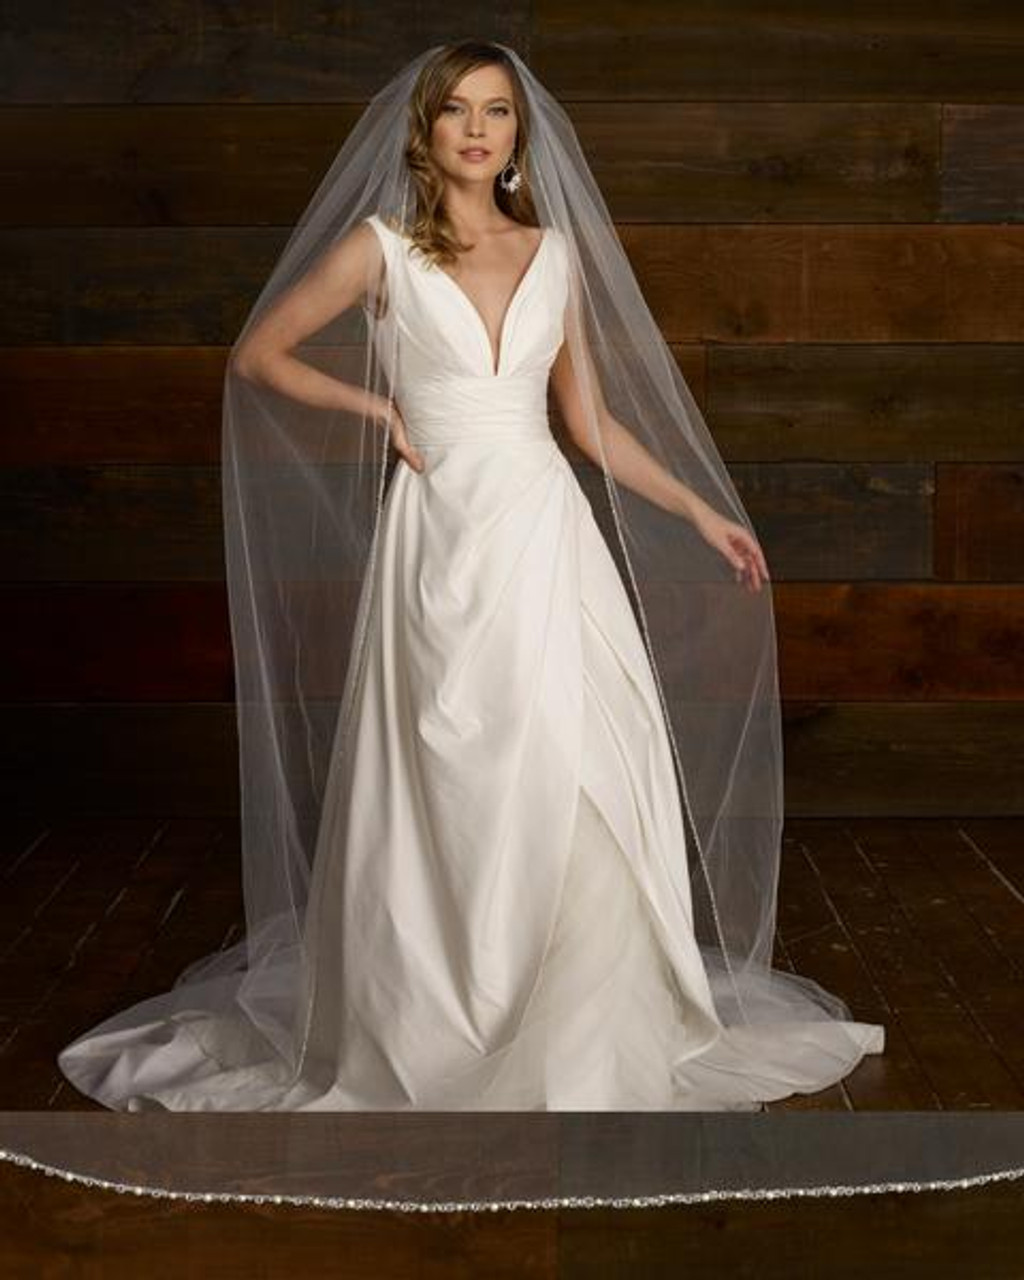 Chapel or Floor Length One Layer Cut Edge Bridal Veil in Ivory - Mariell  Bridal Jewelry & Wedding Accessories